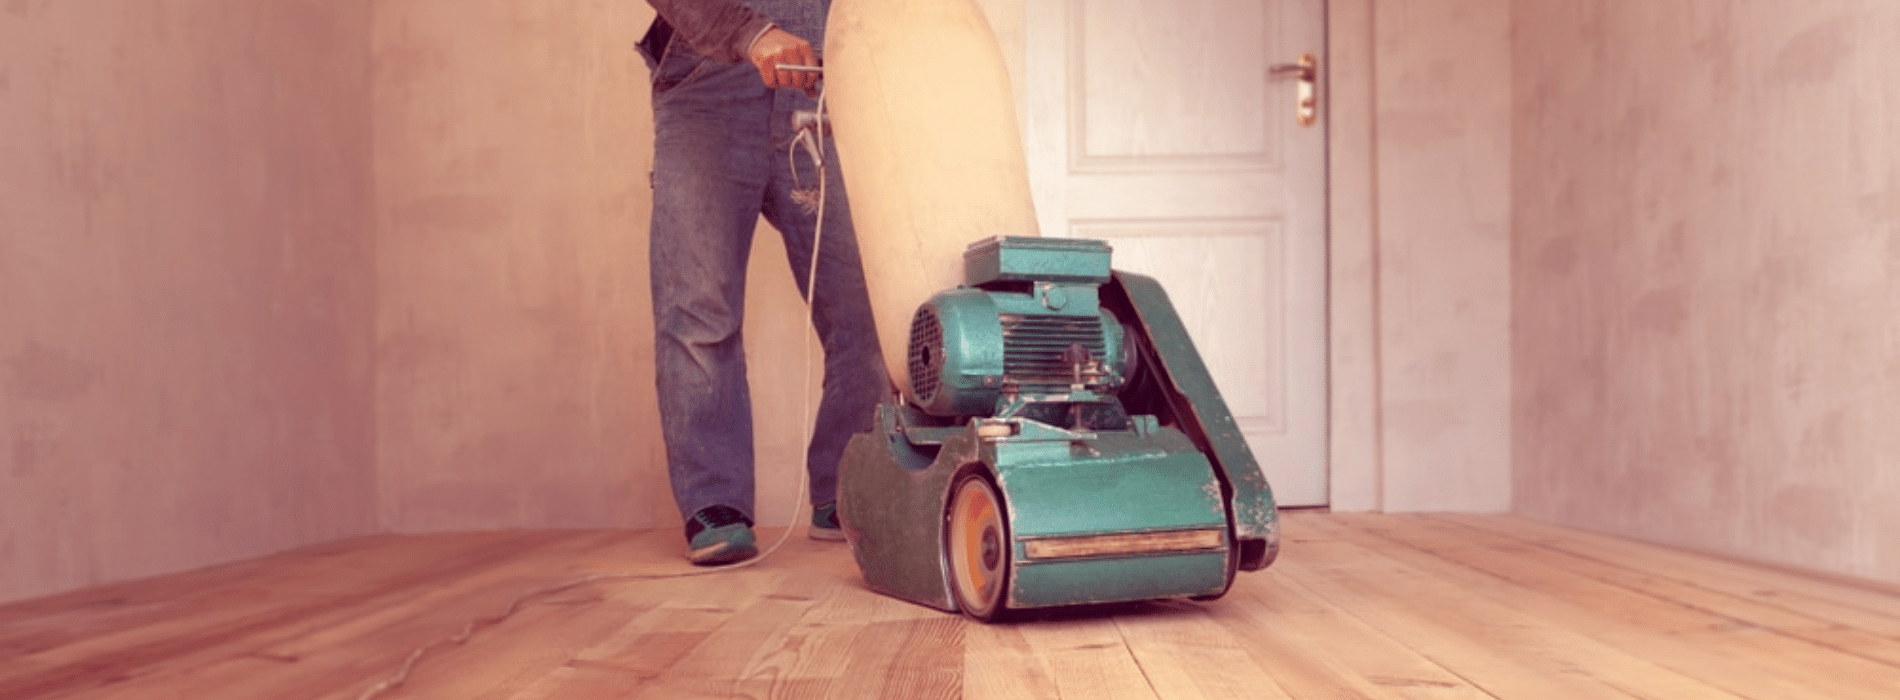 Mr Sander® in Heathrow, TW6 using a 2200 effect, 230 voltage, 50 frequency, and 200x750 mm Bona belt sander for meticulous herringbone floor restoration. Equipped with a HEPA filter dust extraction system for clean, dust-free results.